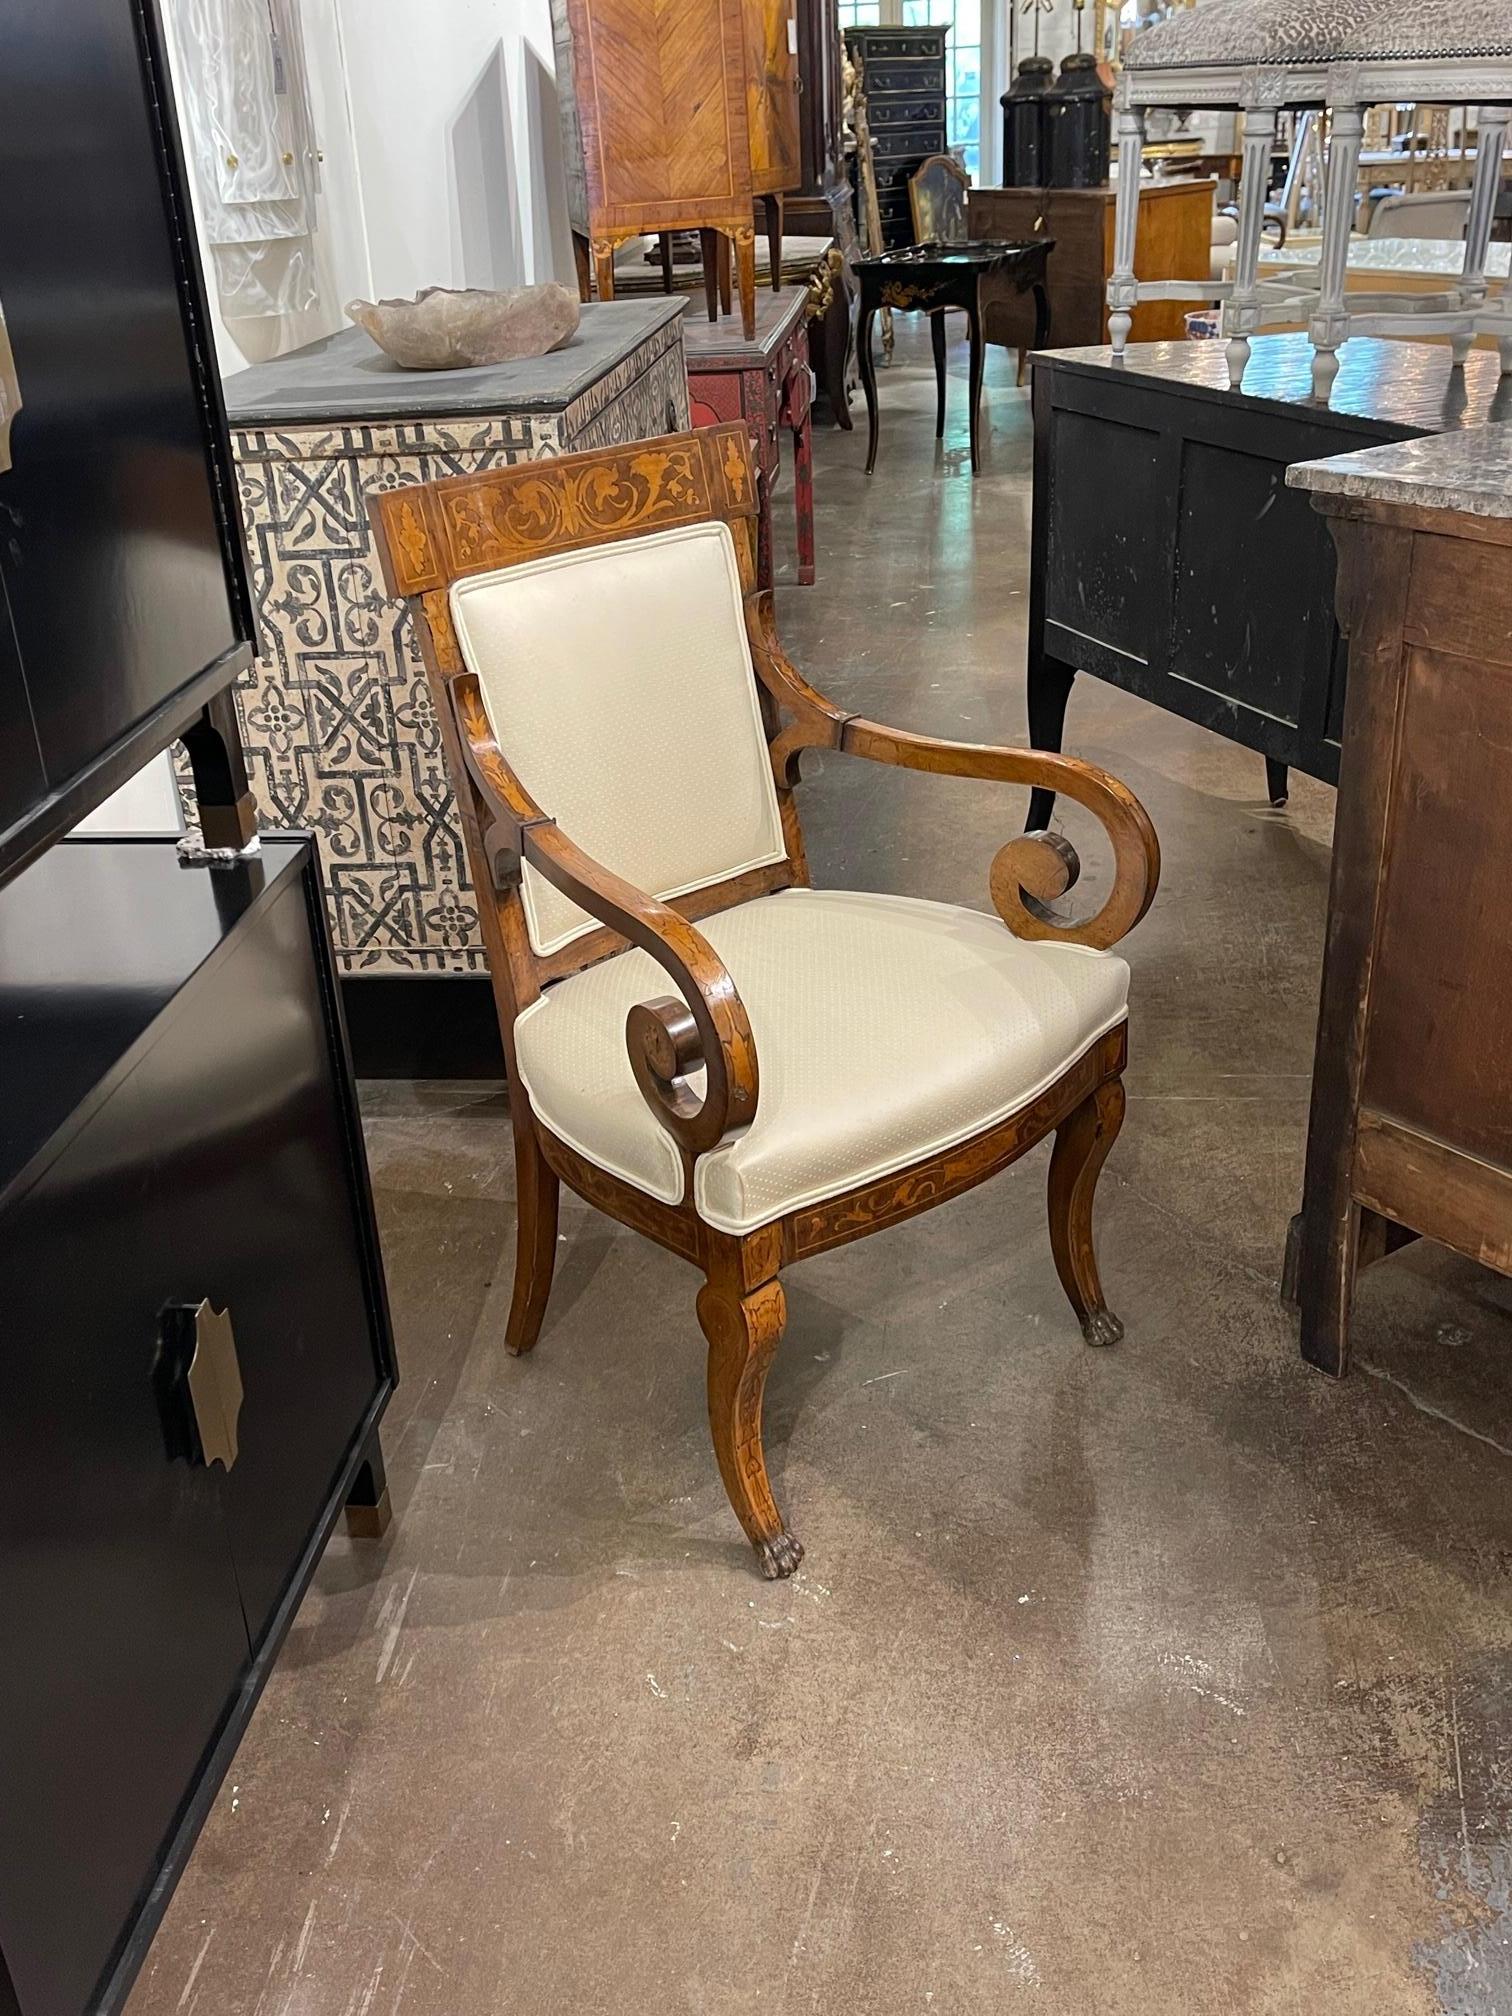 Elegant late 18th century Italian armchair made of walnut and upholstered in a creme colored fabric. There is a beautiful inlaid pattern in the wood. An exceptional piece!!